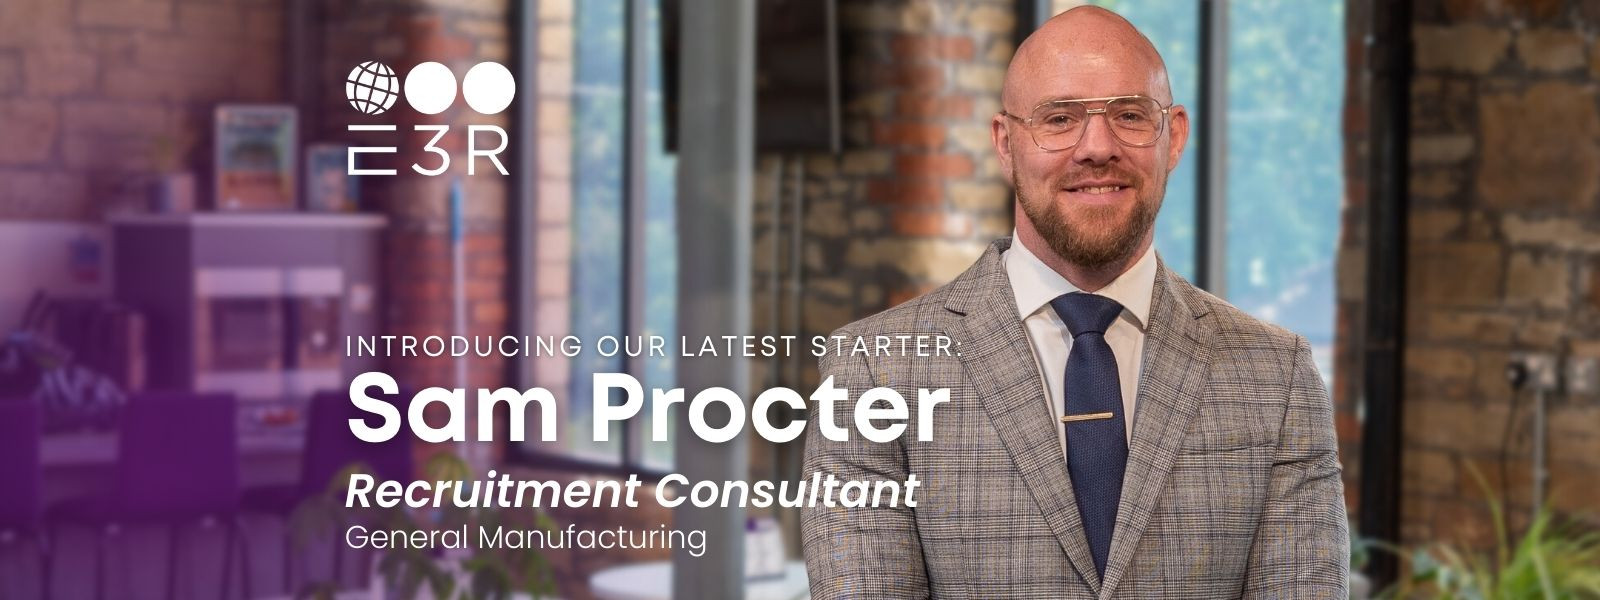 General Manufacturing team welcomes new Recruitment Consultant, Sam Proctor